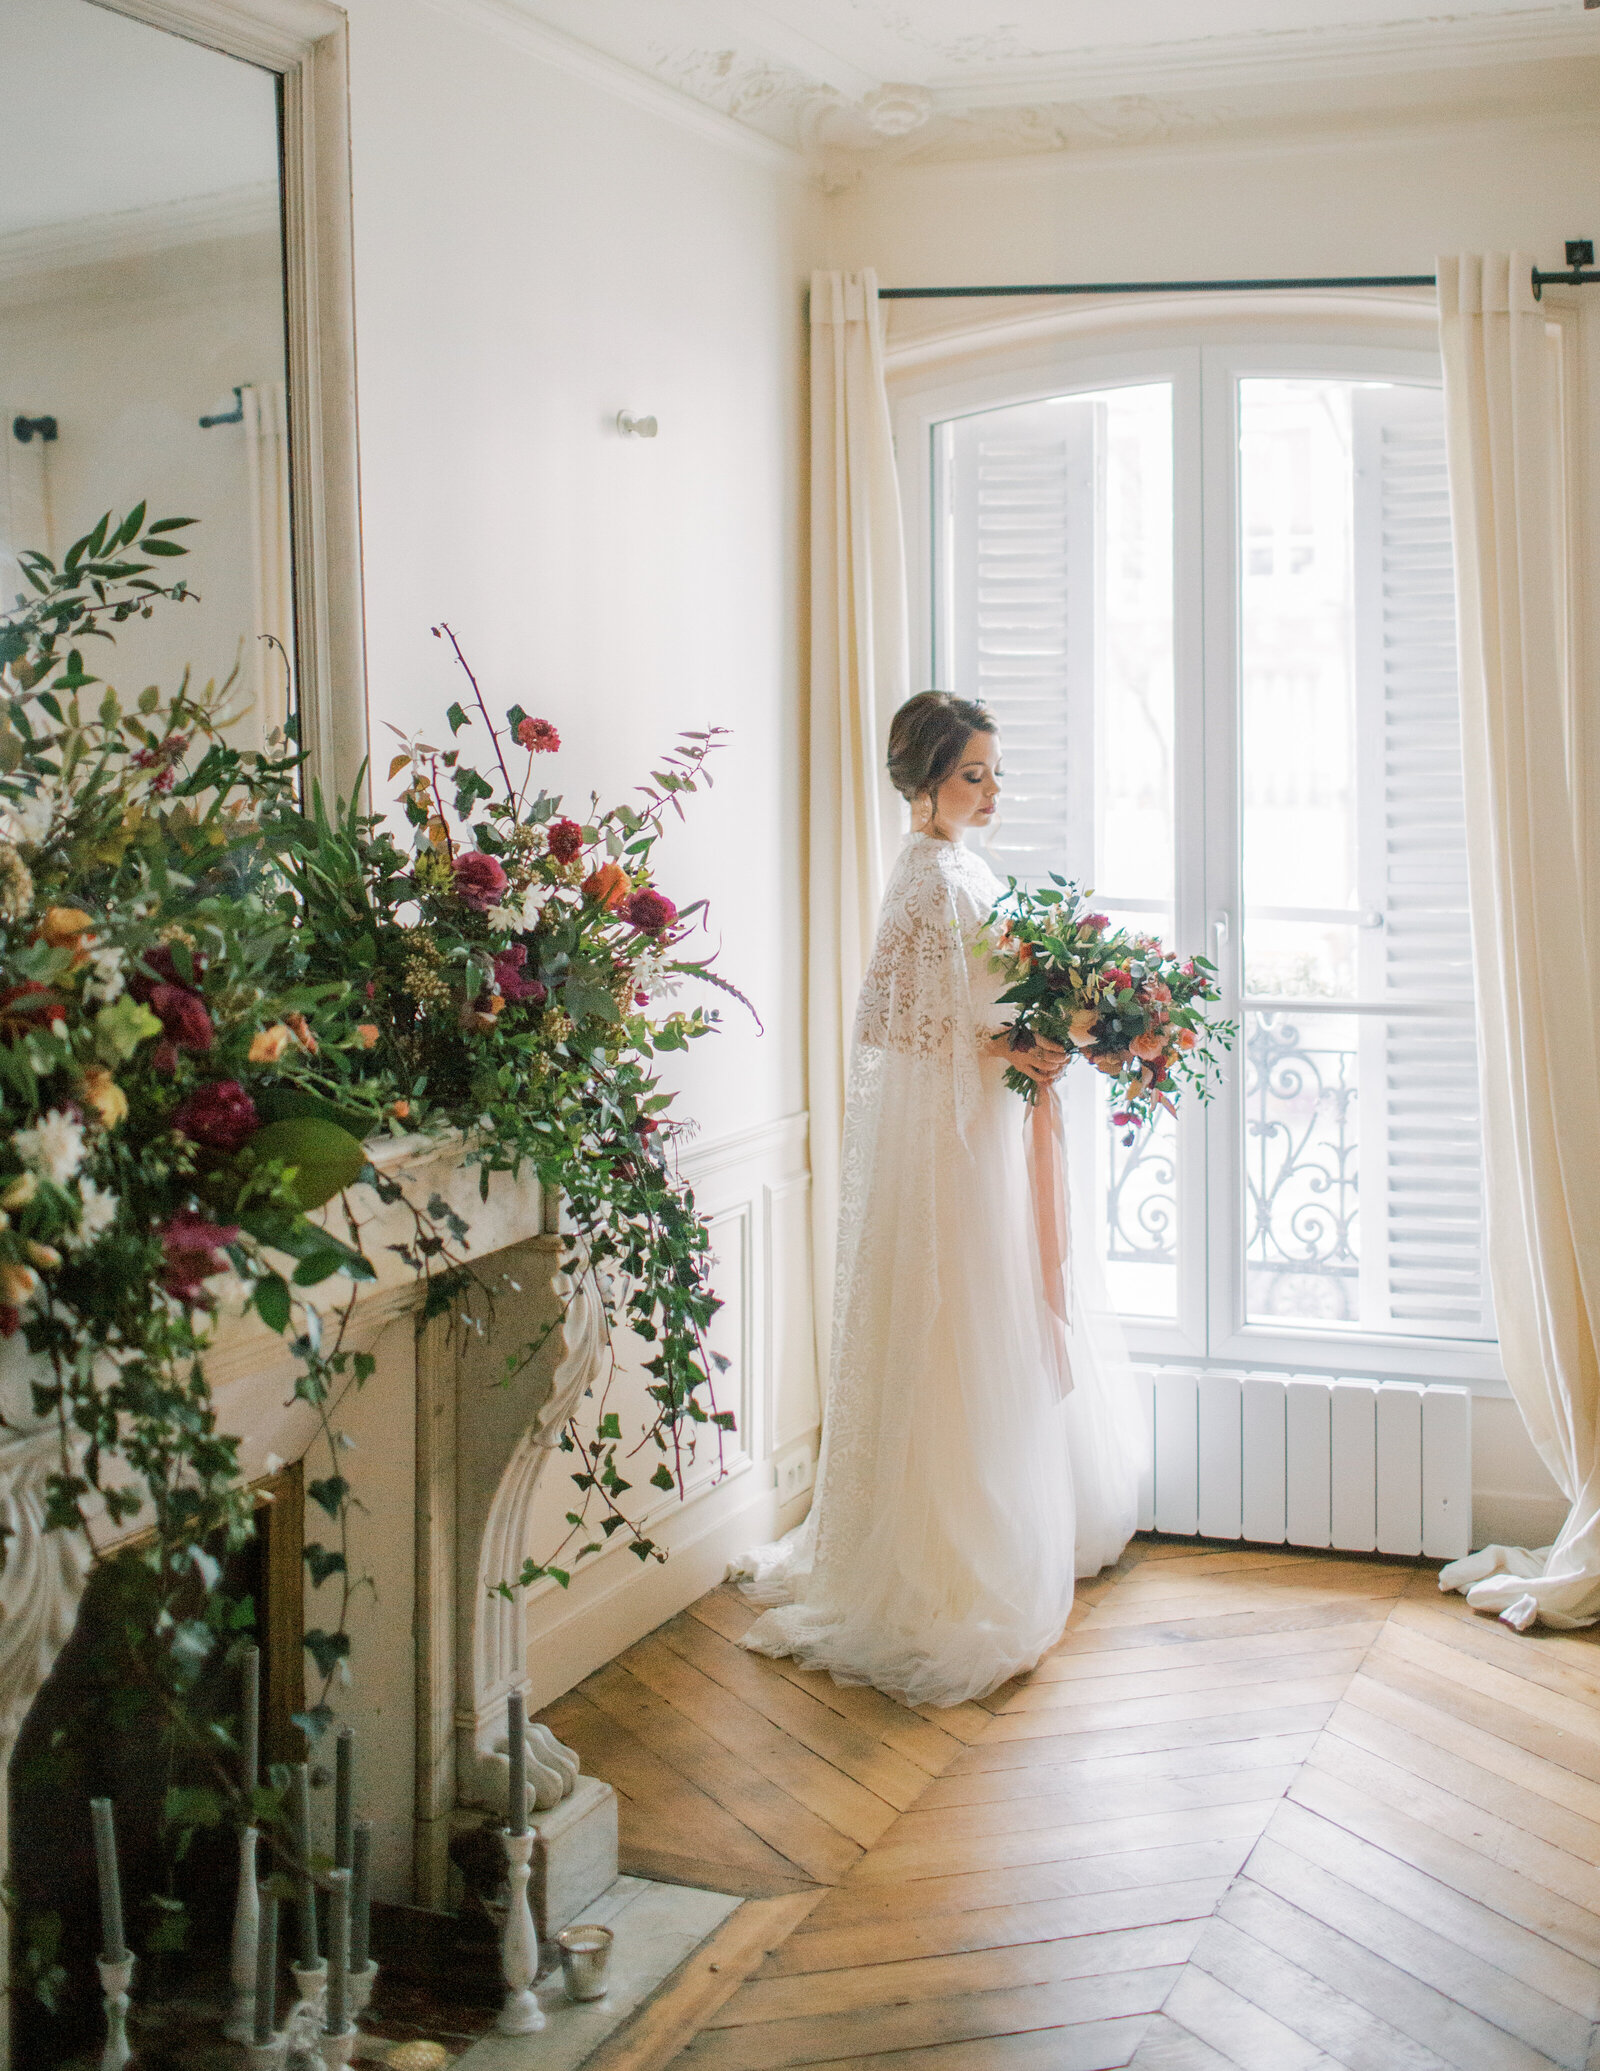 bride holding a bouquet and looking out the window in Paris apartment